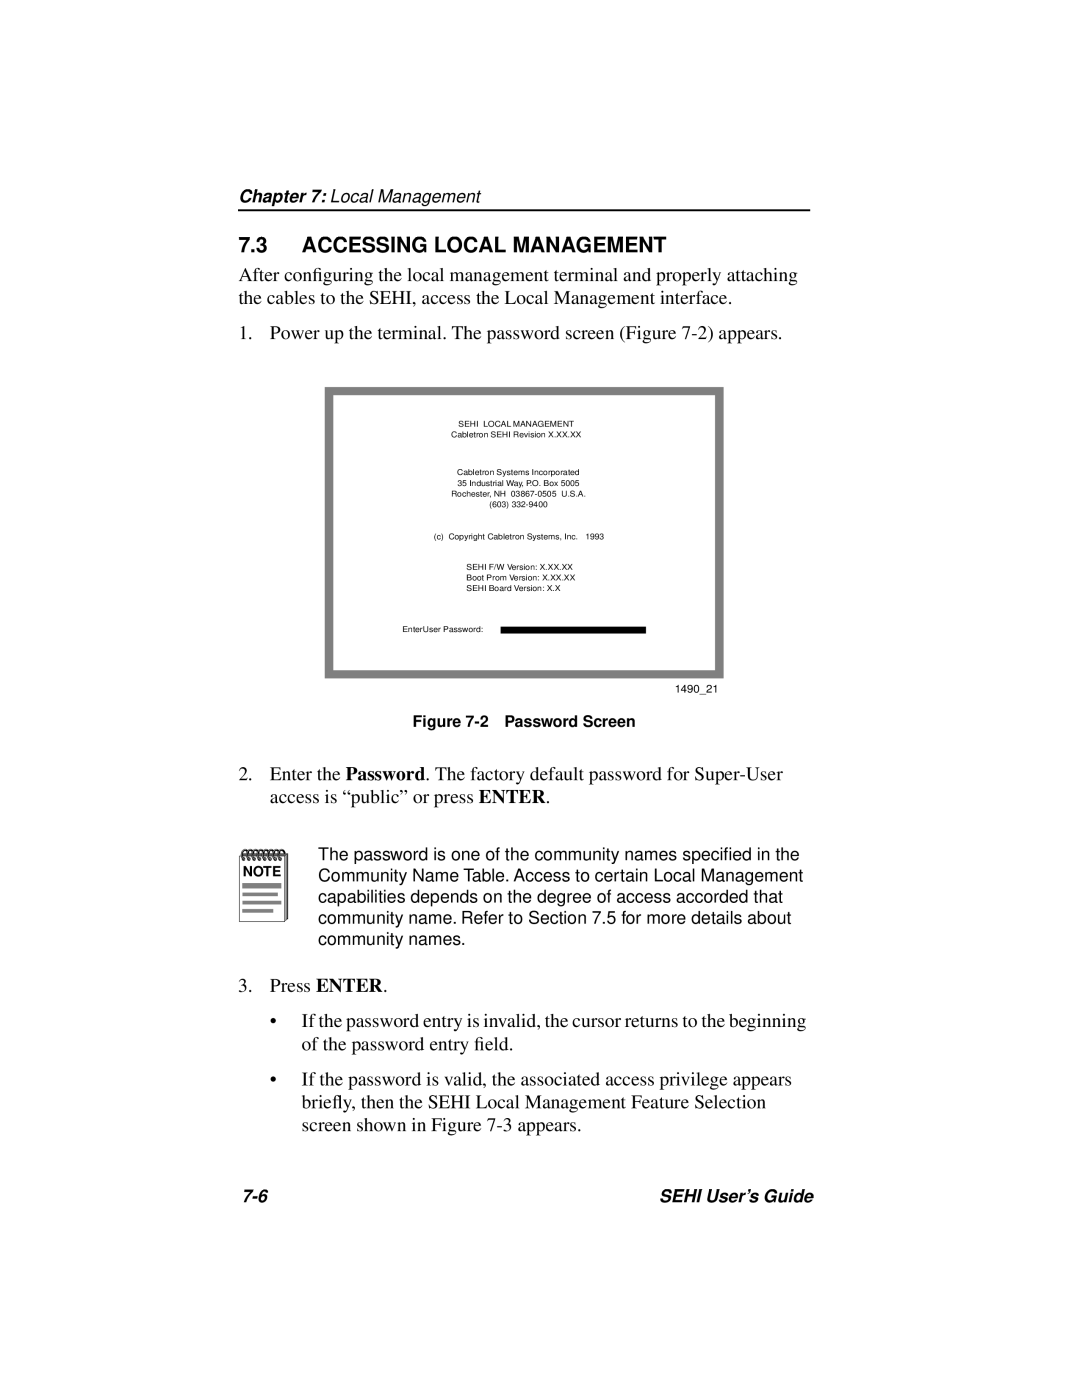 Cabletron Systems SEHI-22FL manual Accessing Local Management 